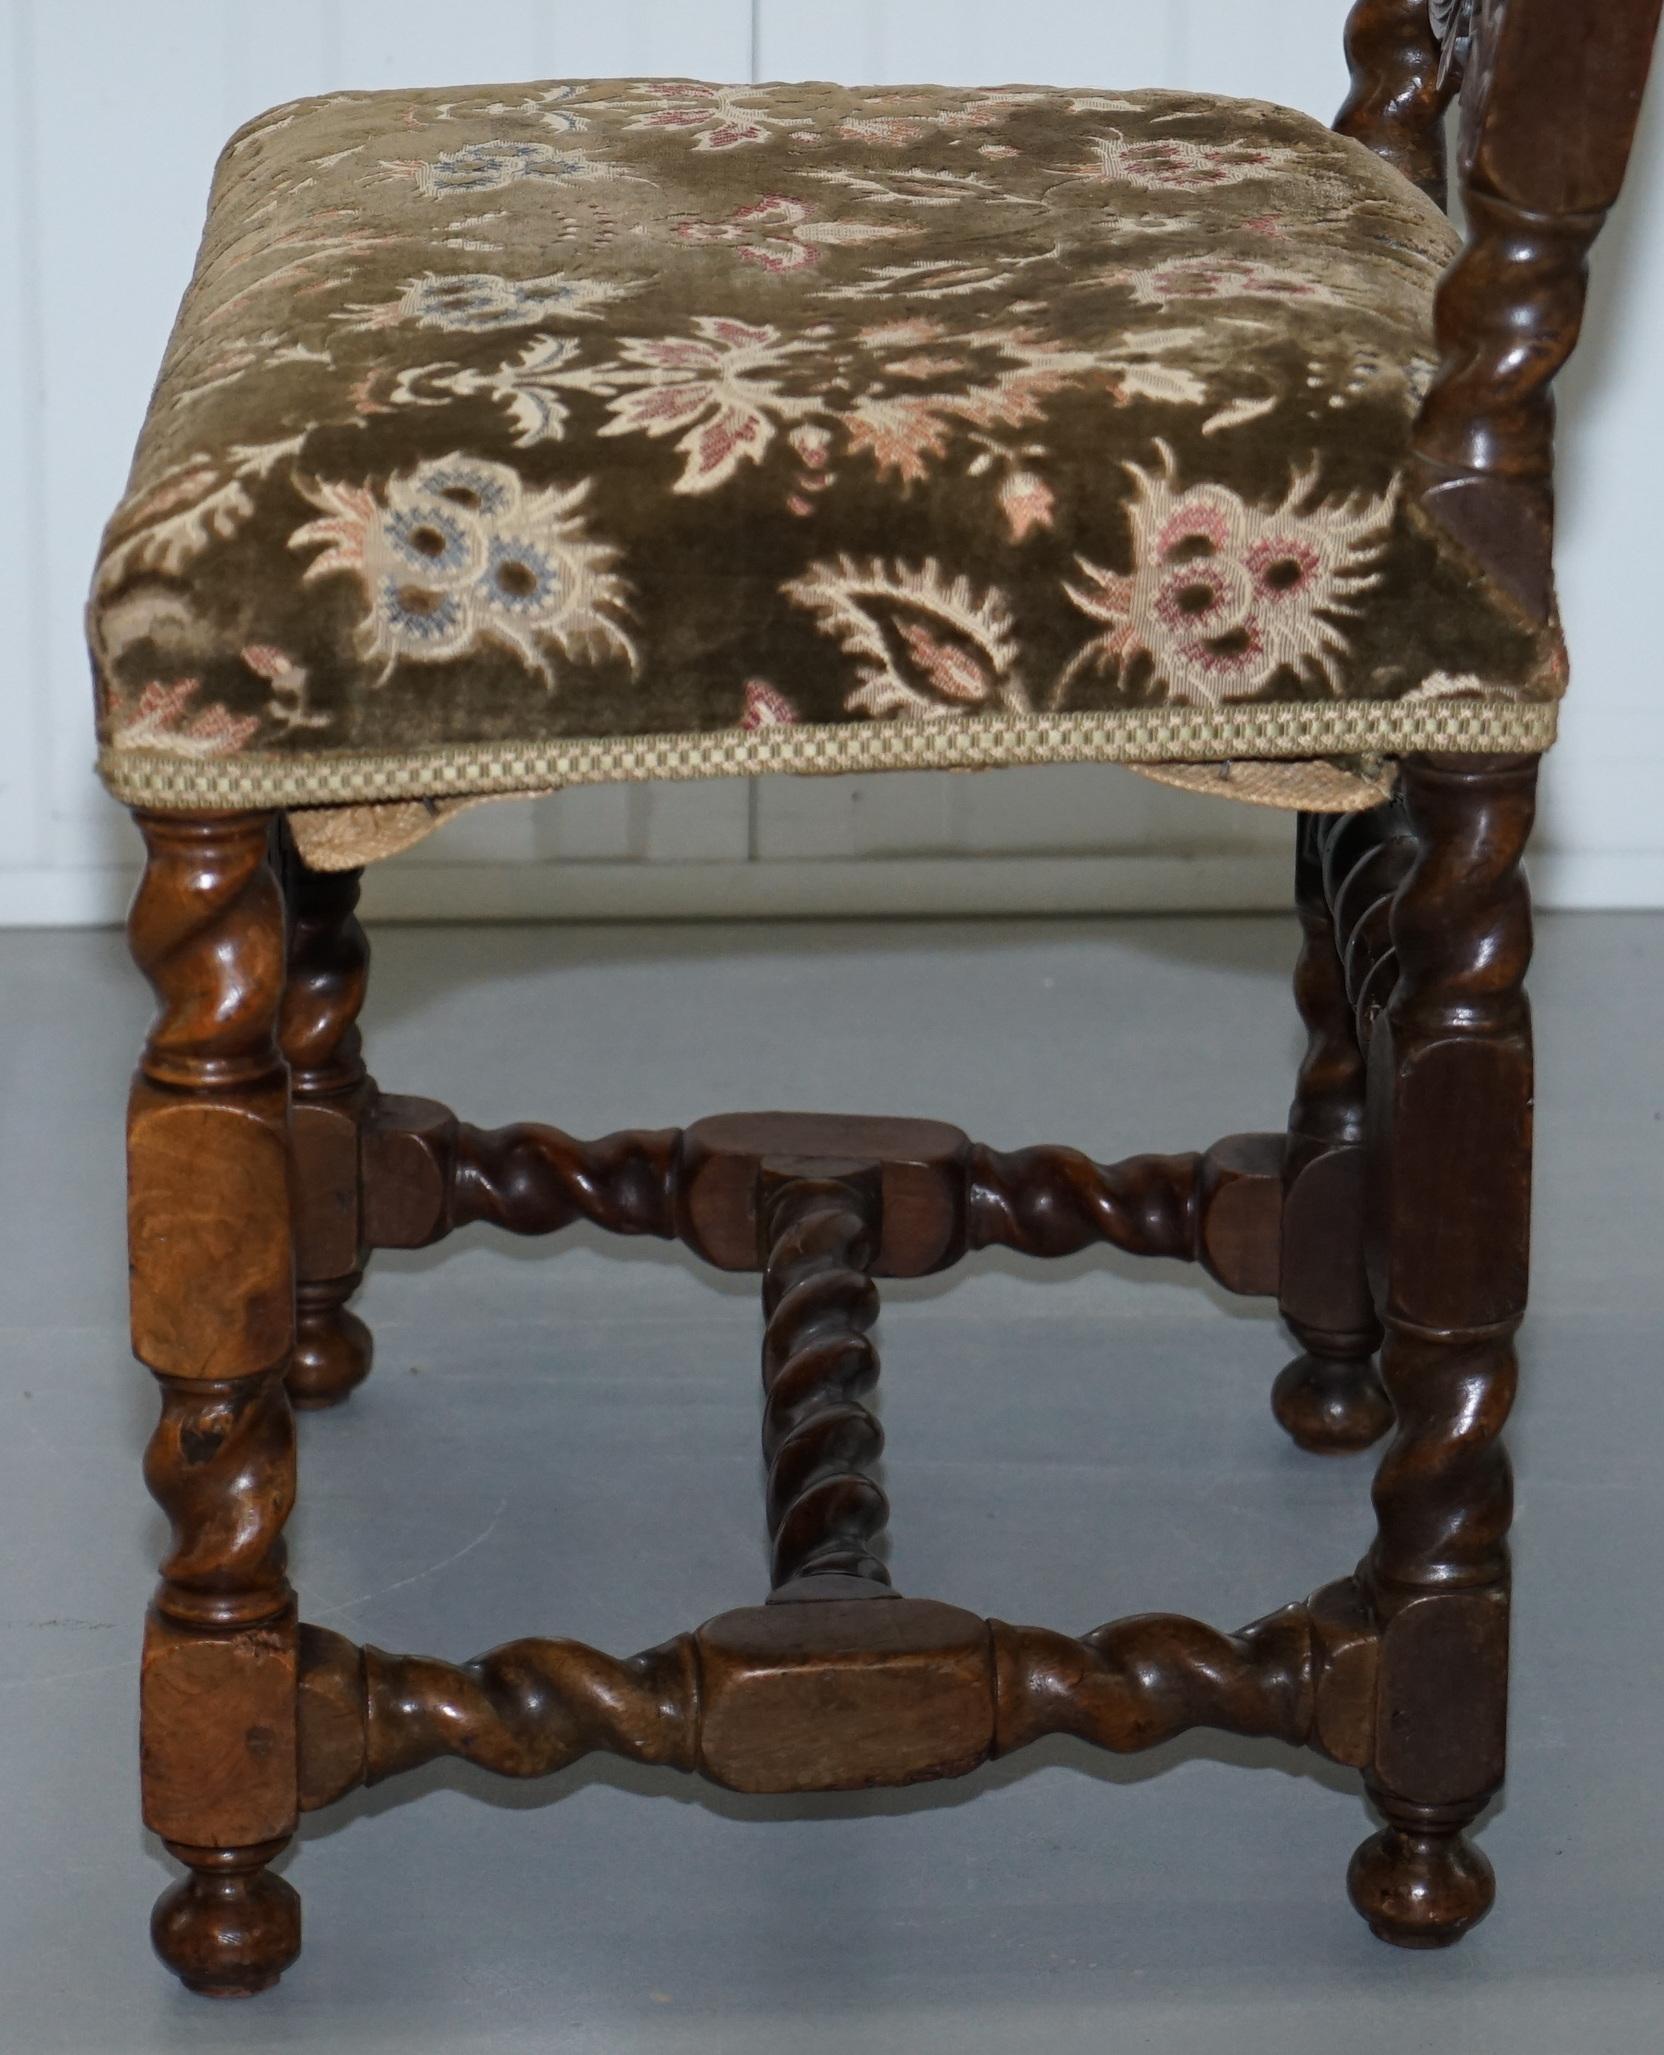 Pair of 18th Century Fruit Wood Carved Chair Cherubs Holding a Crown and Flowers For Sale 1